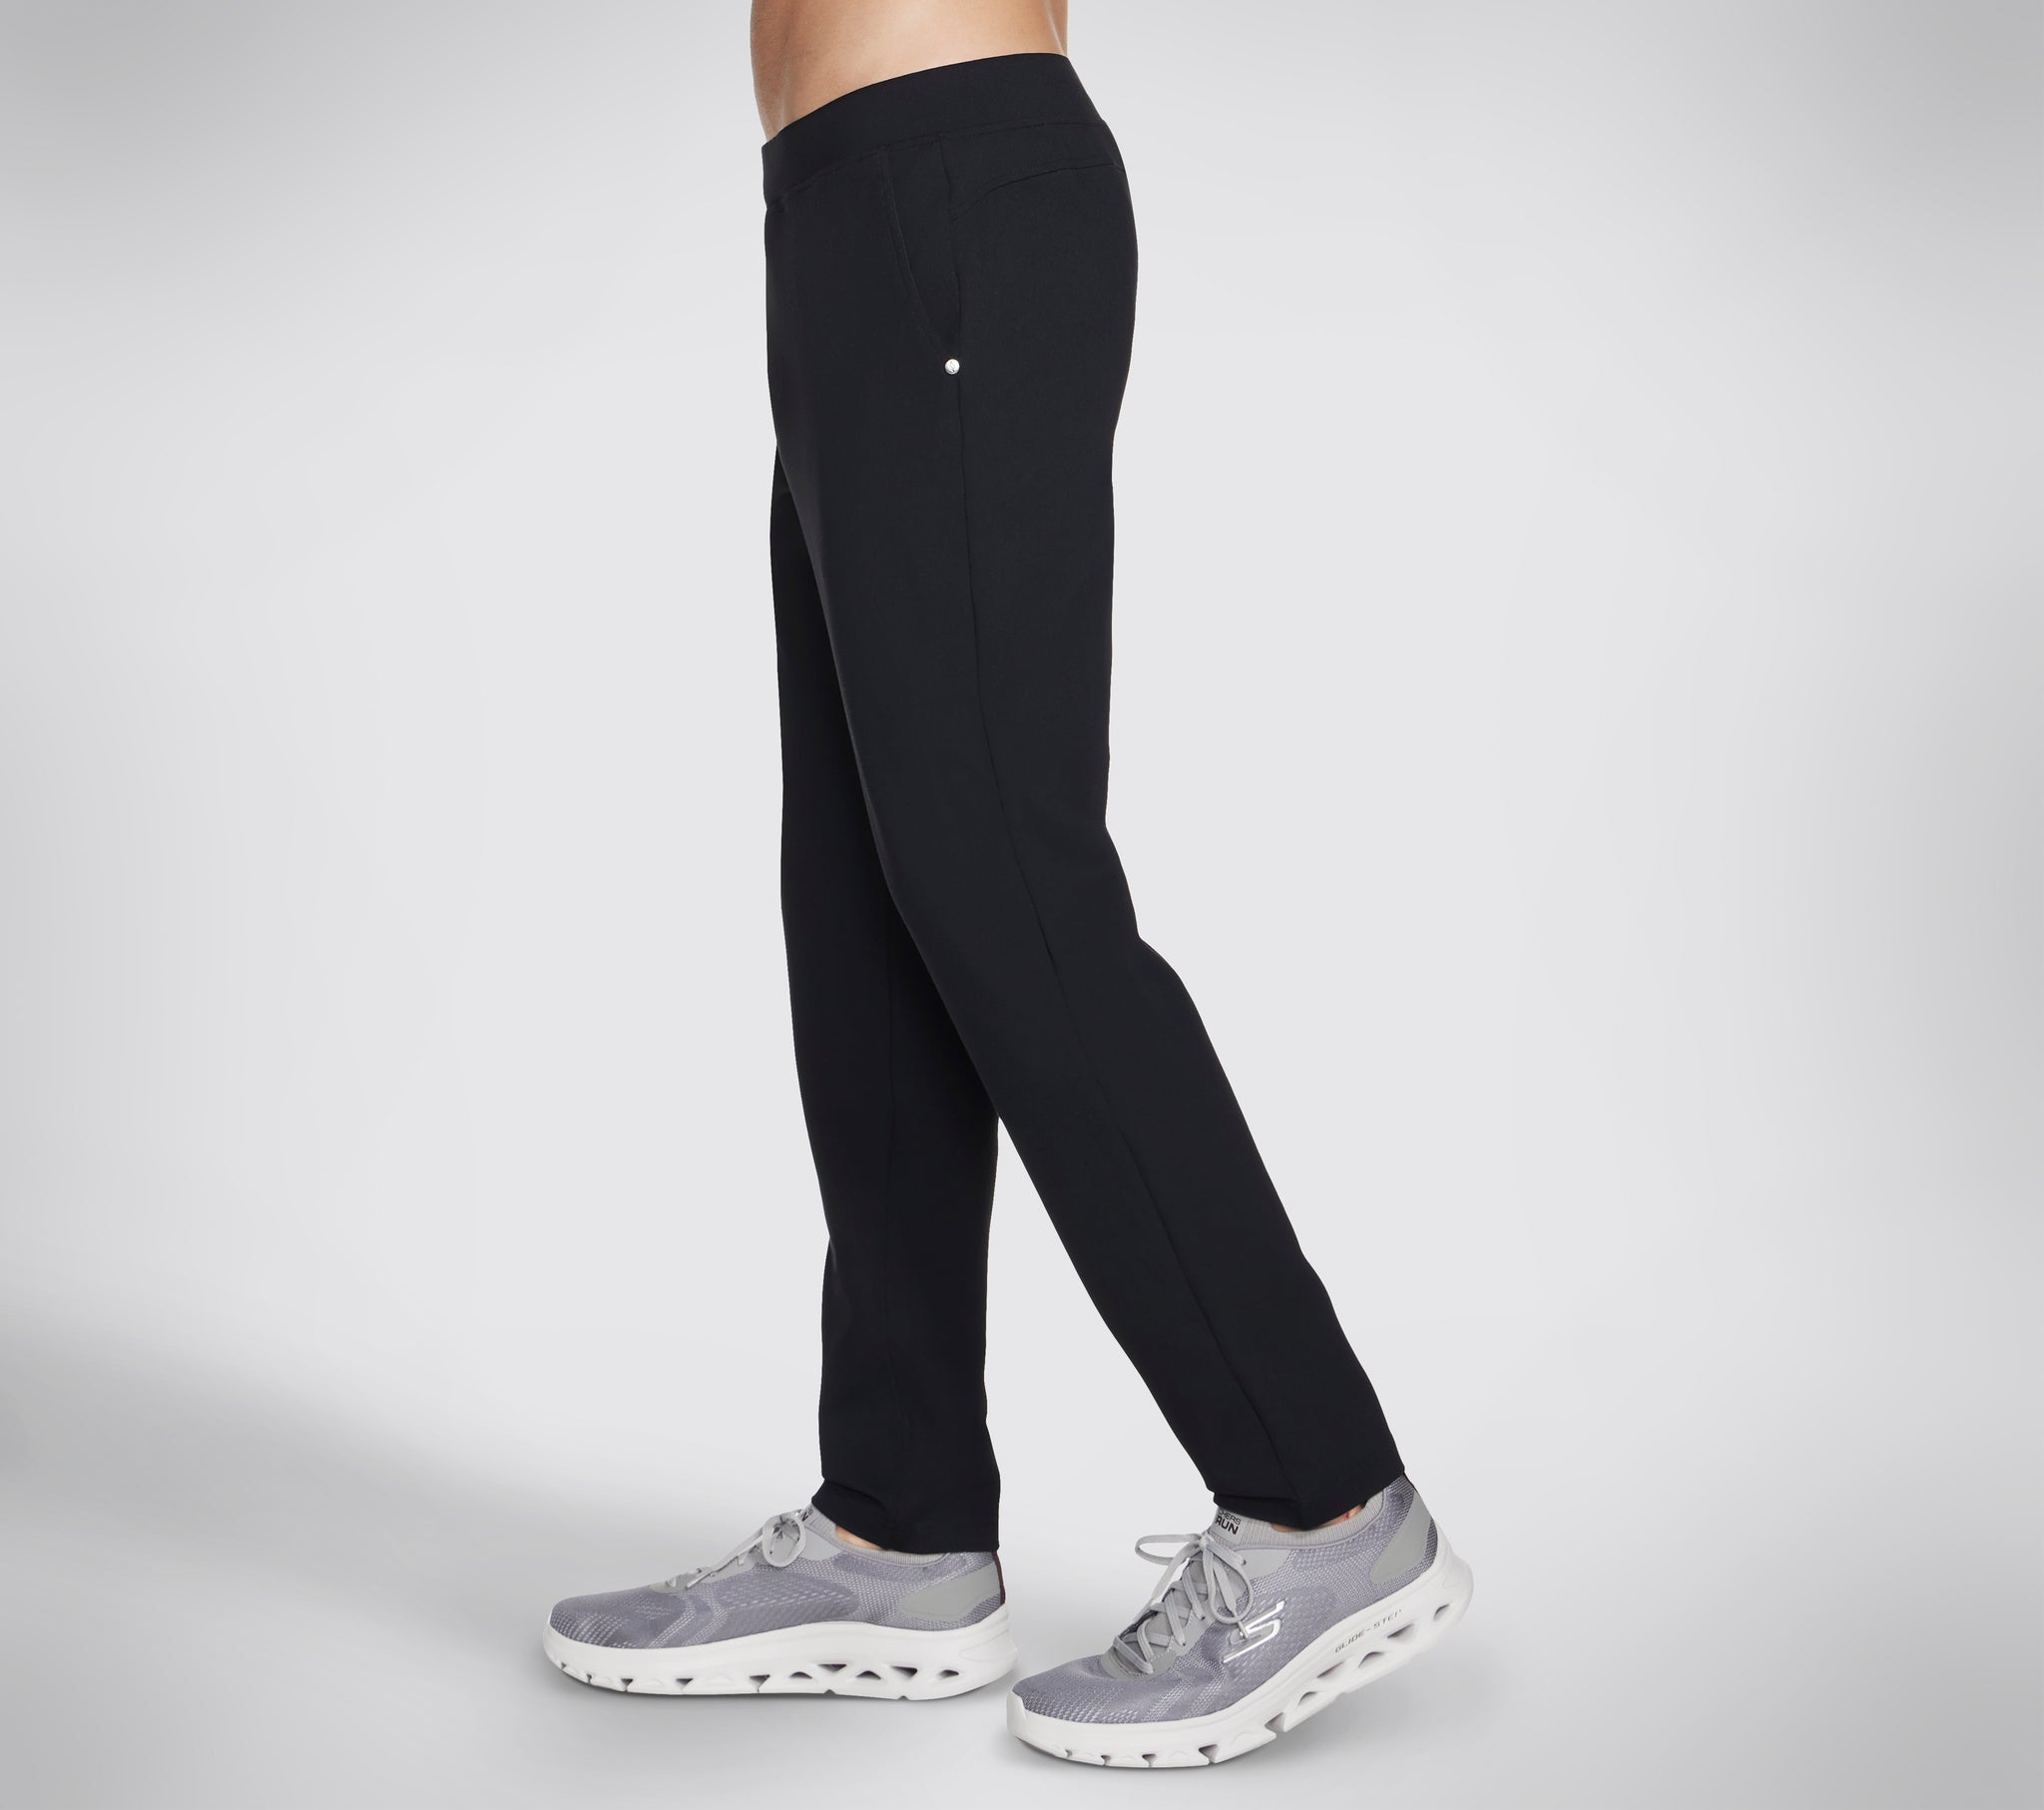 Clothing & Shoes - Bottoms - Pants - Skechers The Go Walk Controller Knit  Pant - Online Shopping for Canadians